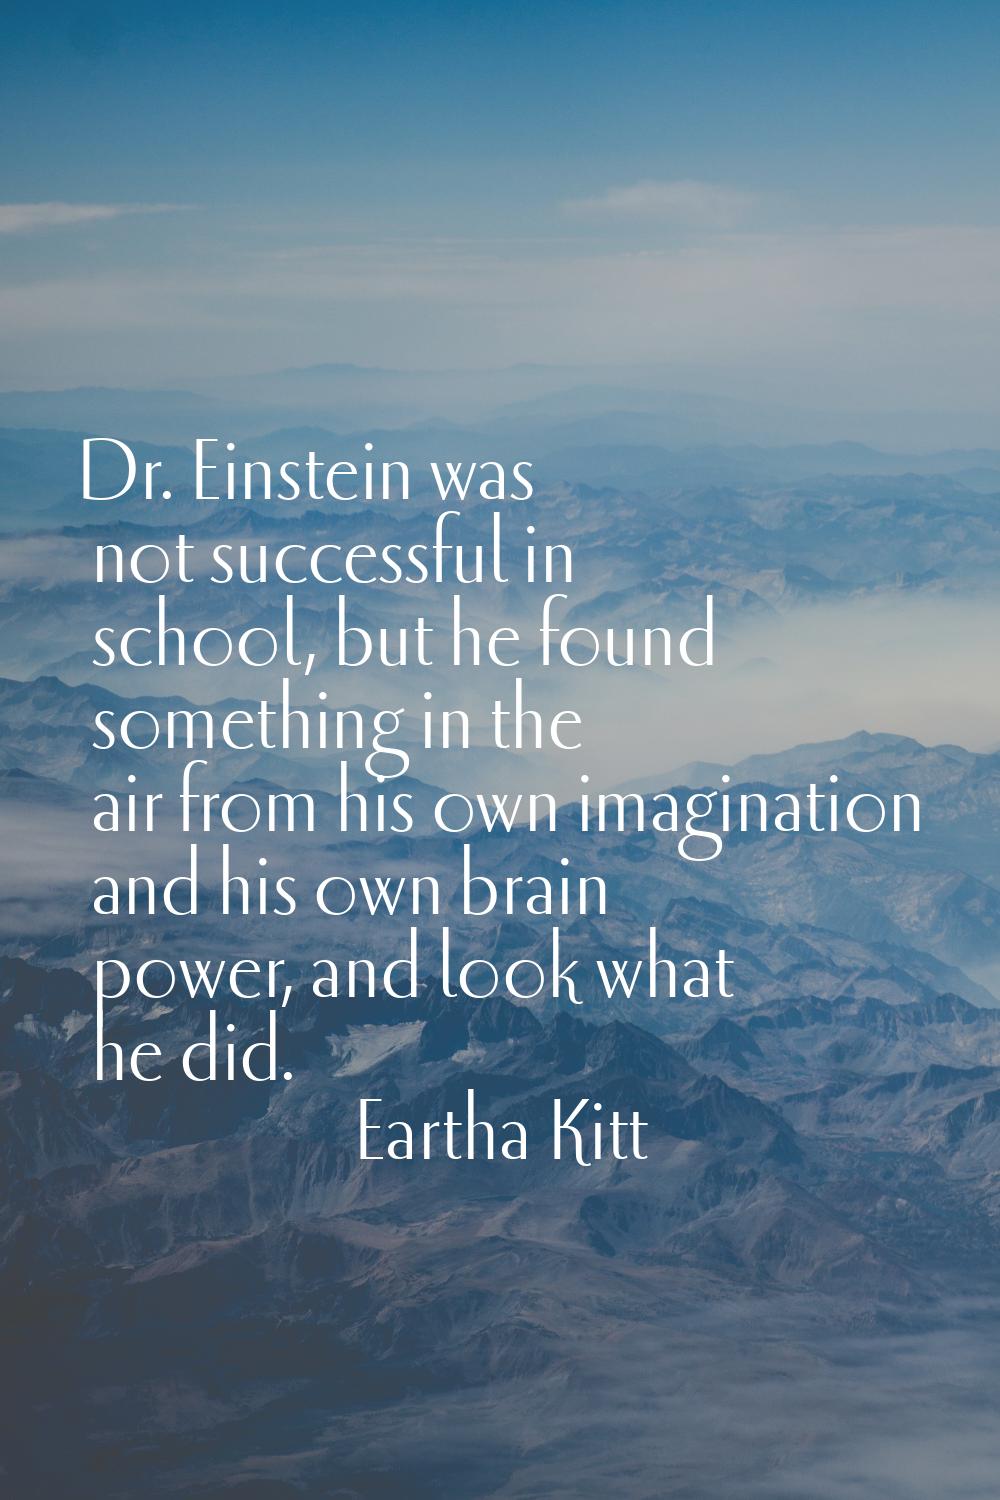 Dr. Einstein was not successful in school, but he found something in the air from his own imaginati